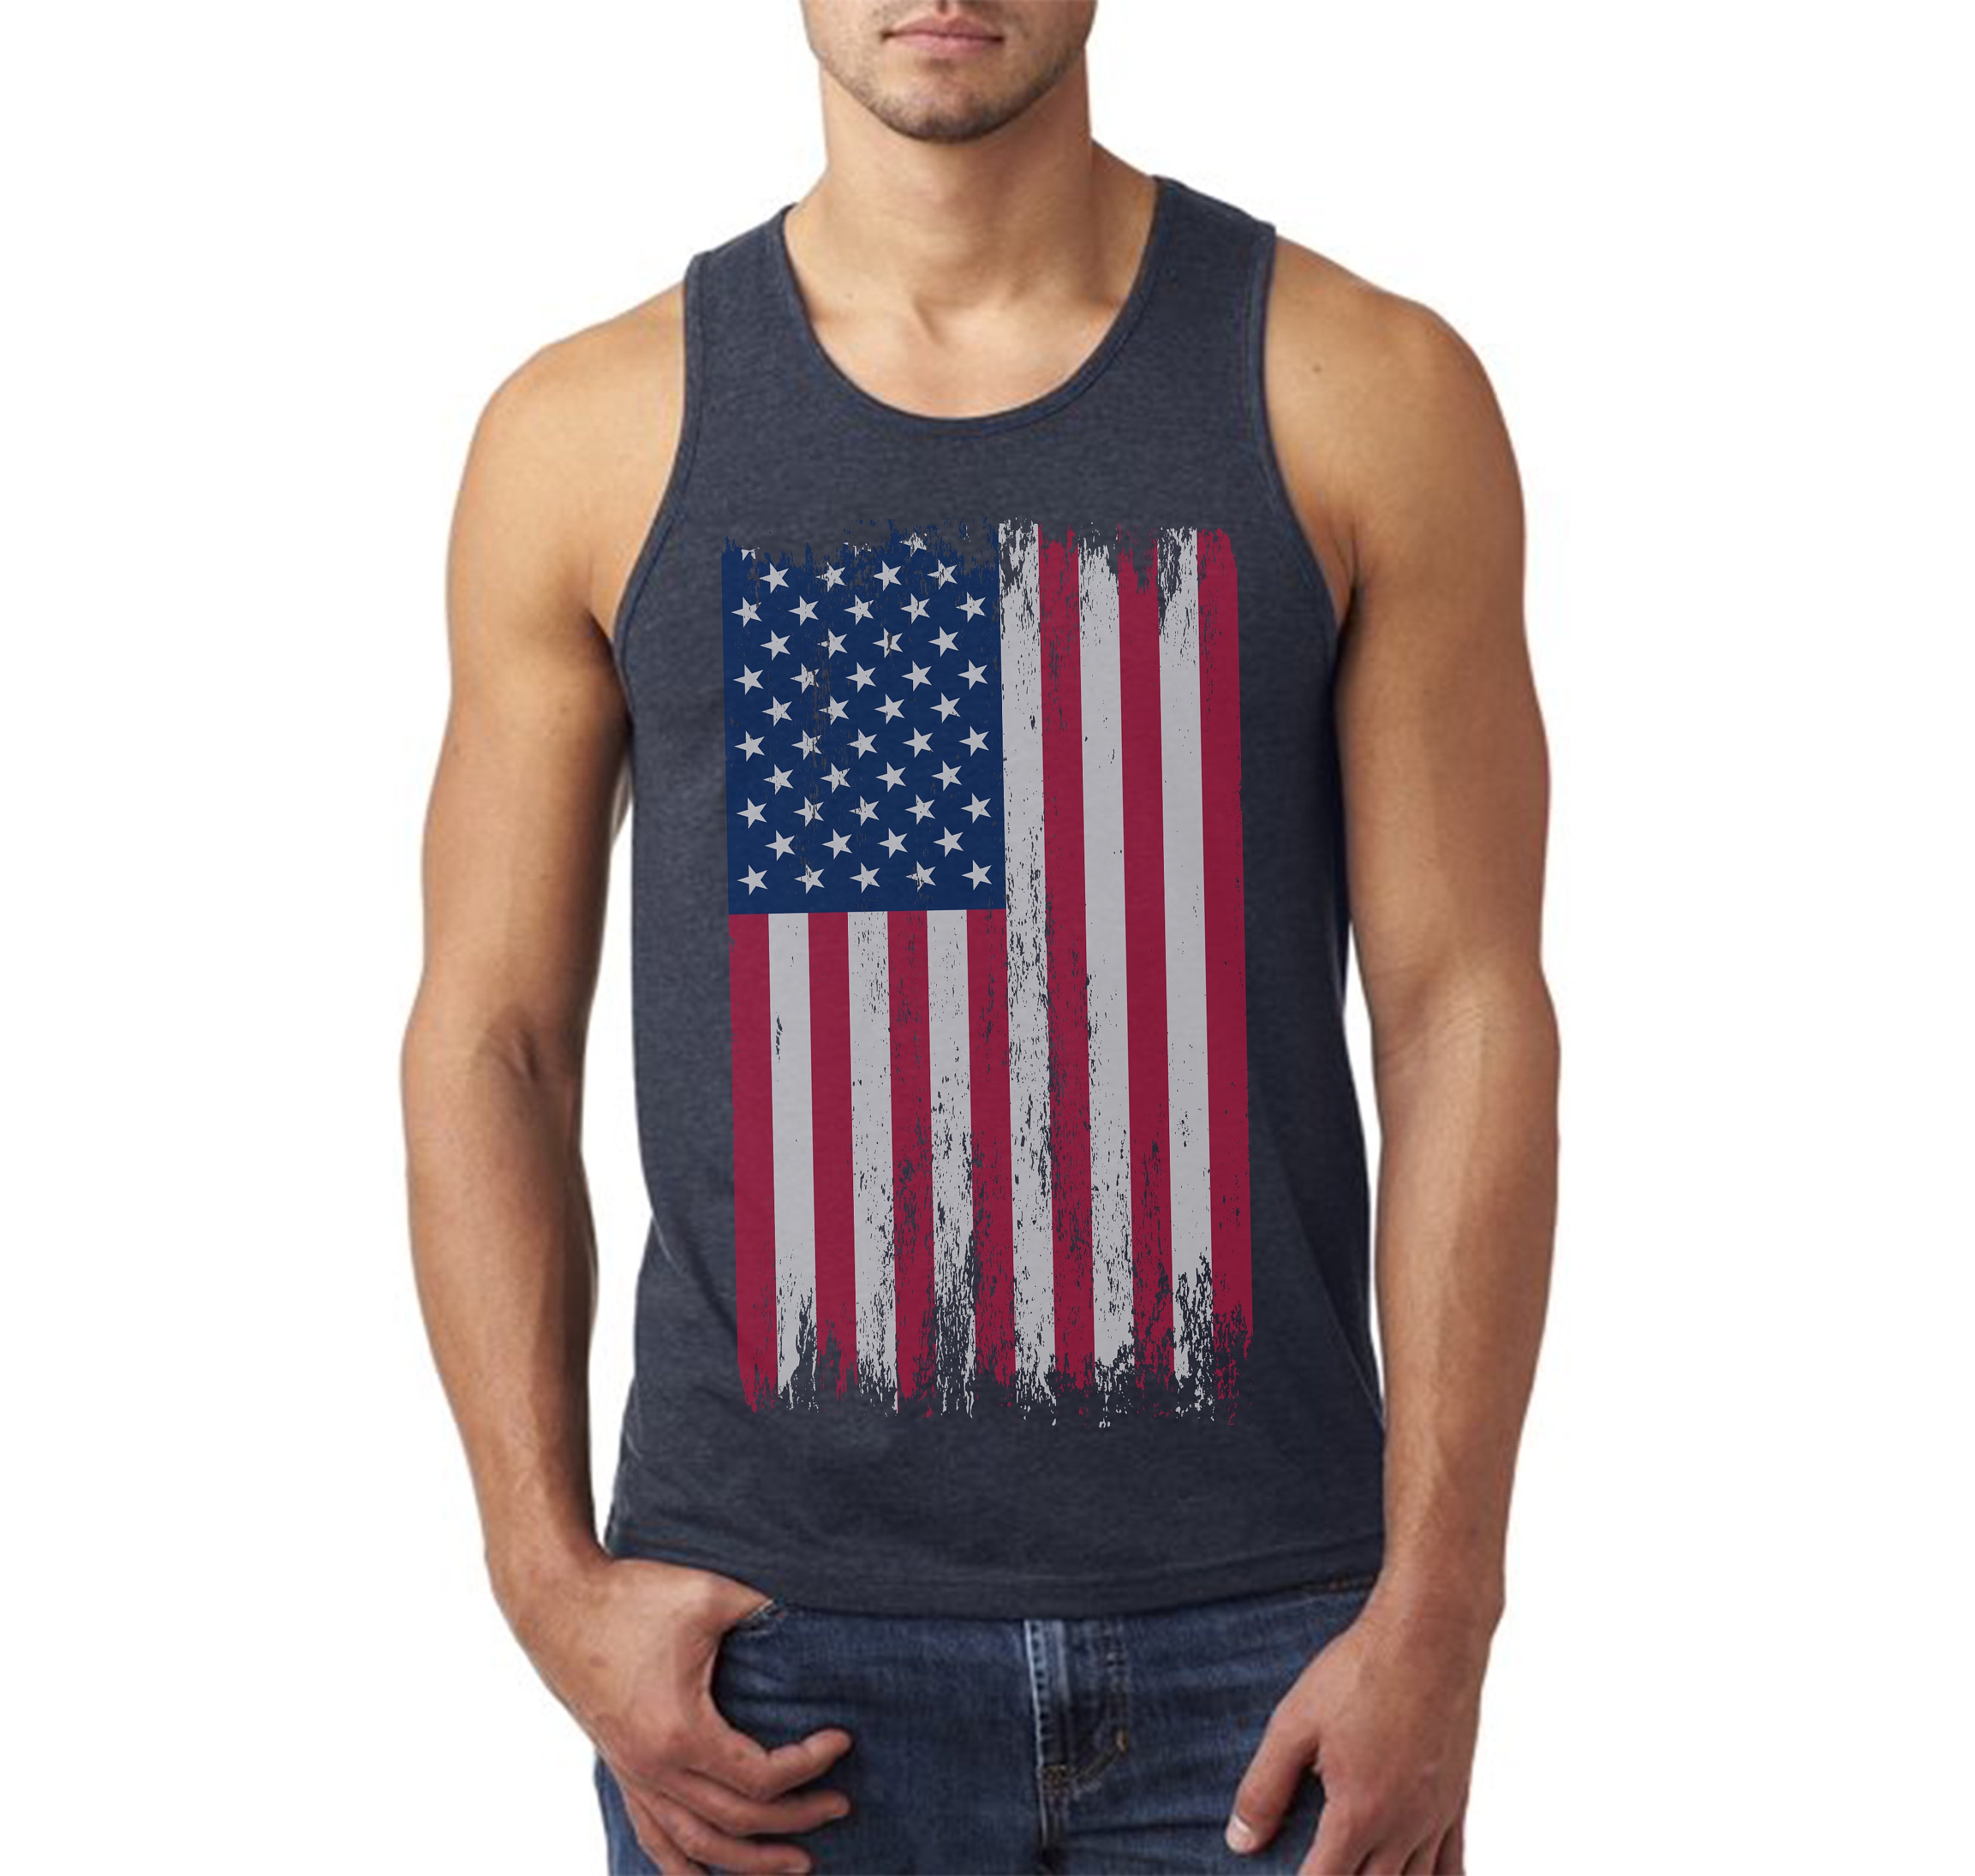 USA Distressed American Flag Tank Tops for Men USA Graphic - Etsy